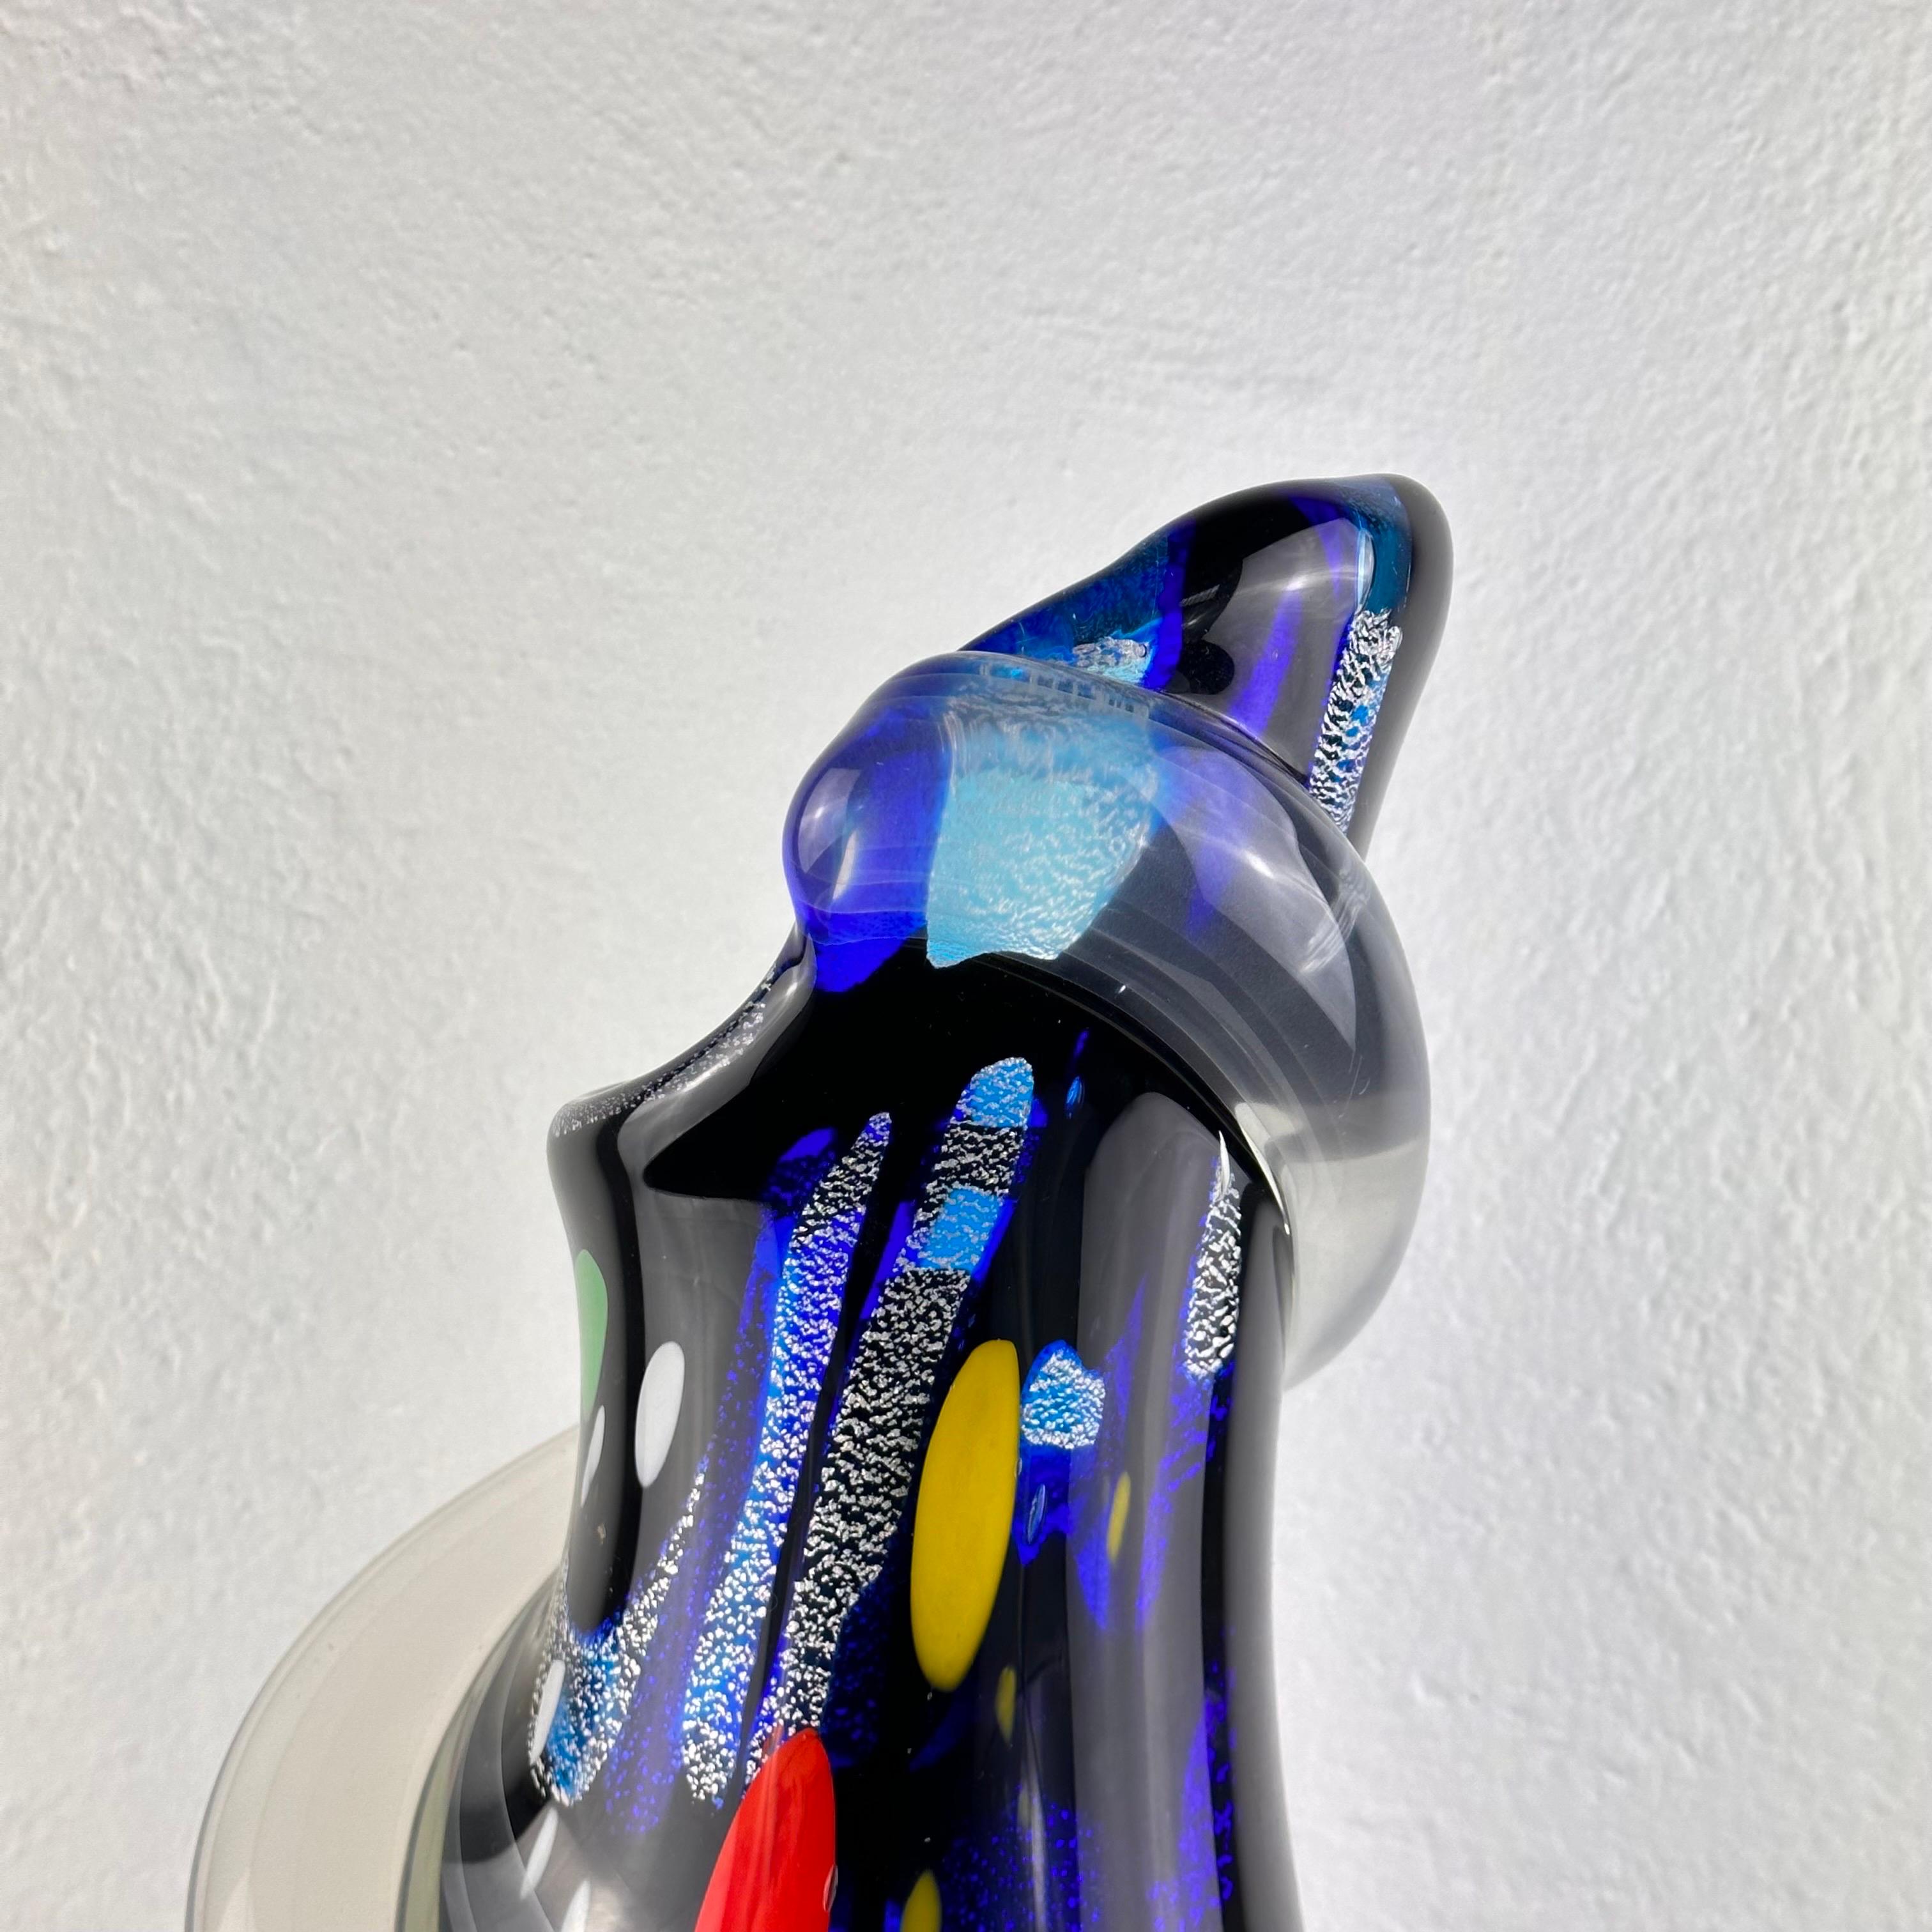 Exquisite Abstract Murano Glass Vase by S. Toso, Signed 1970s Masterpiece For Sale 1